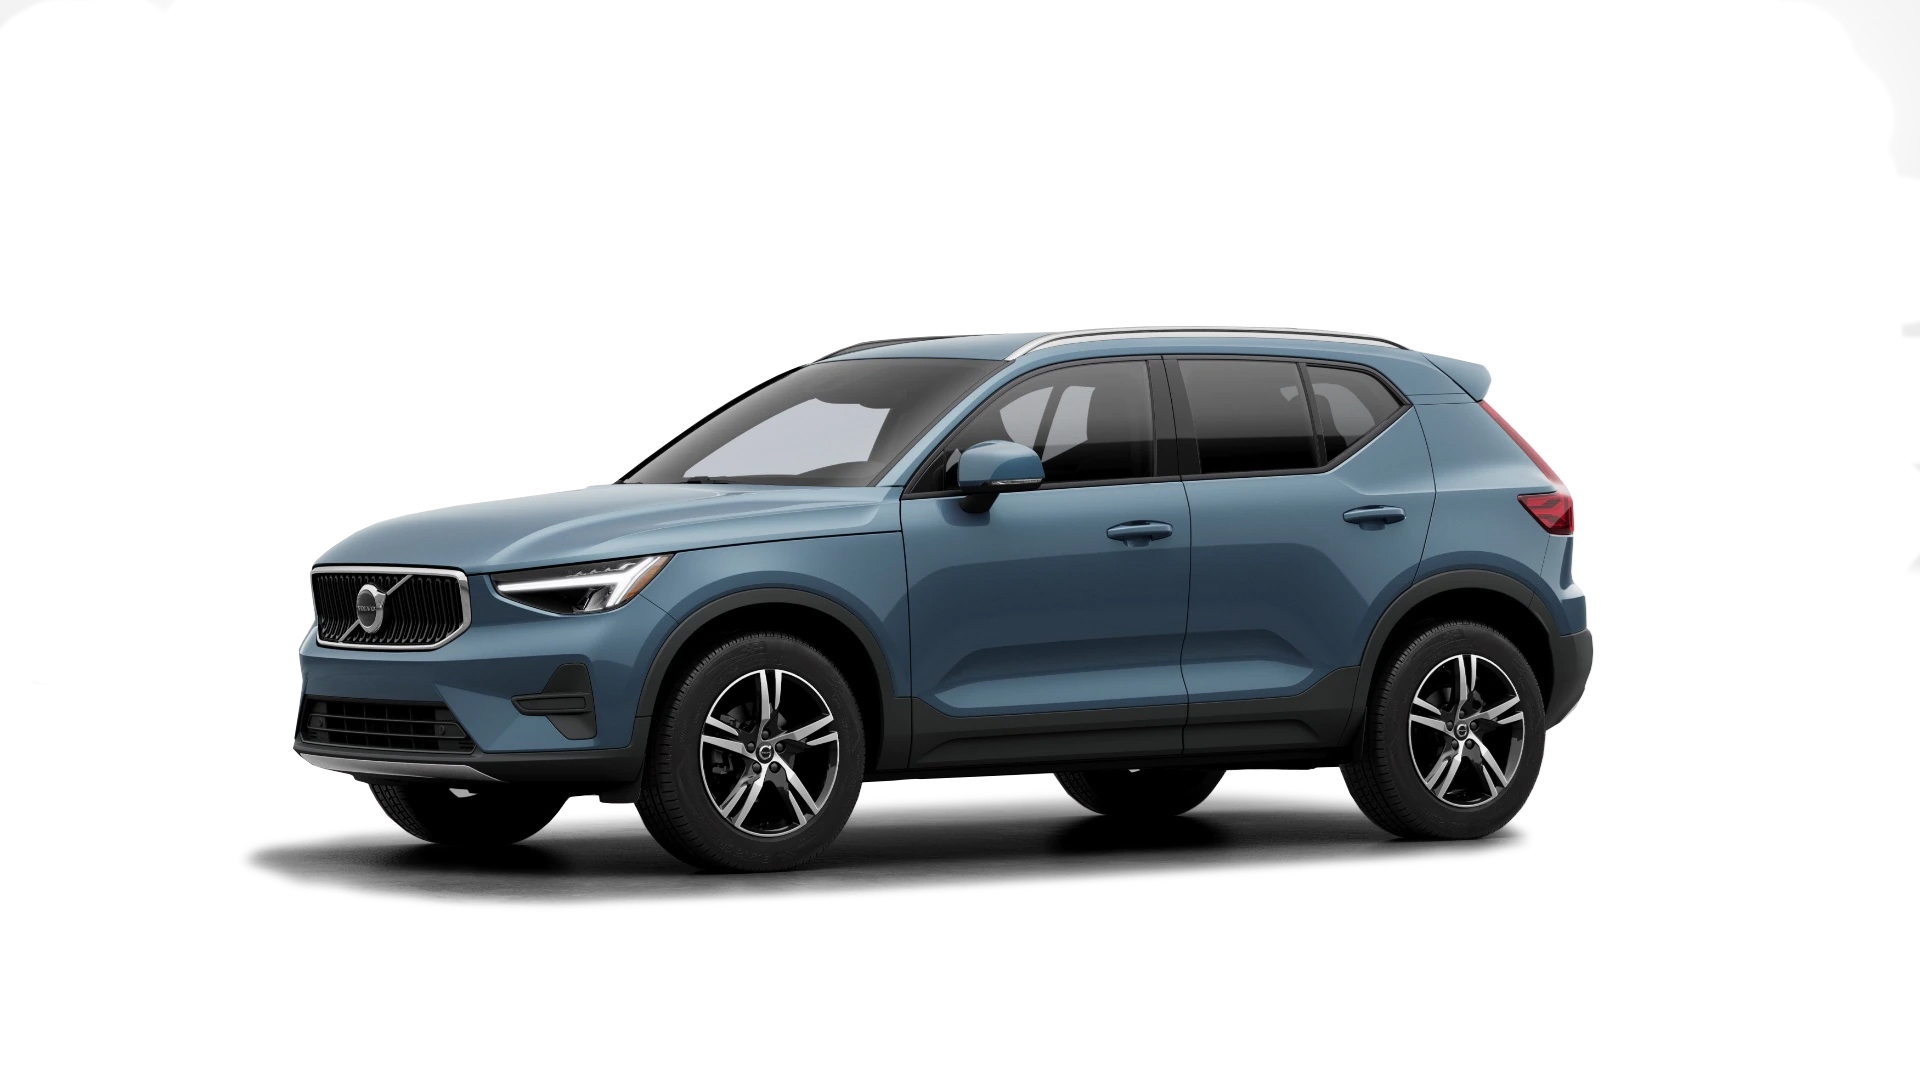 2023 Volvo XC40 B4 Ultimate Dark Theme Full Specs, Features and Price